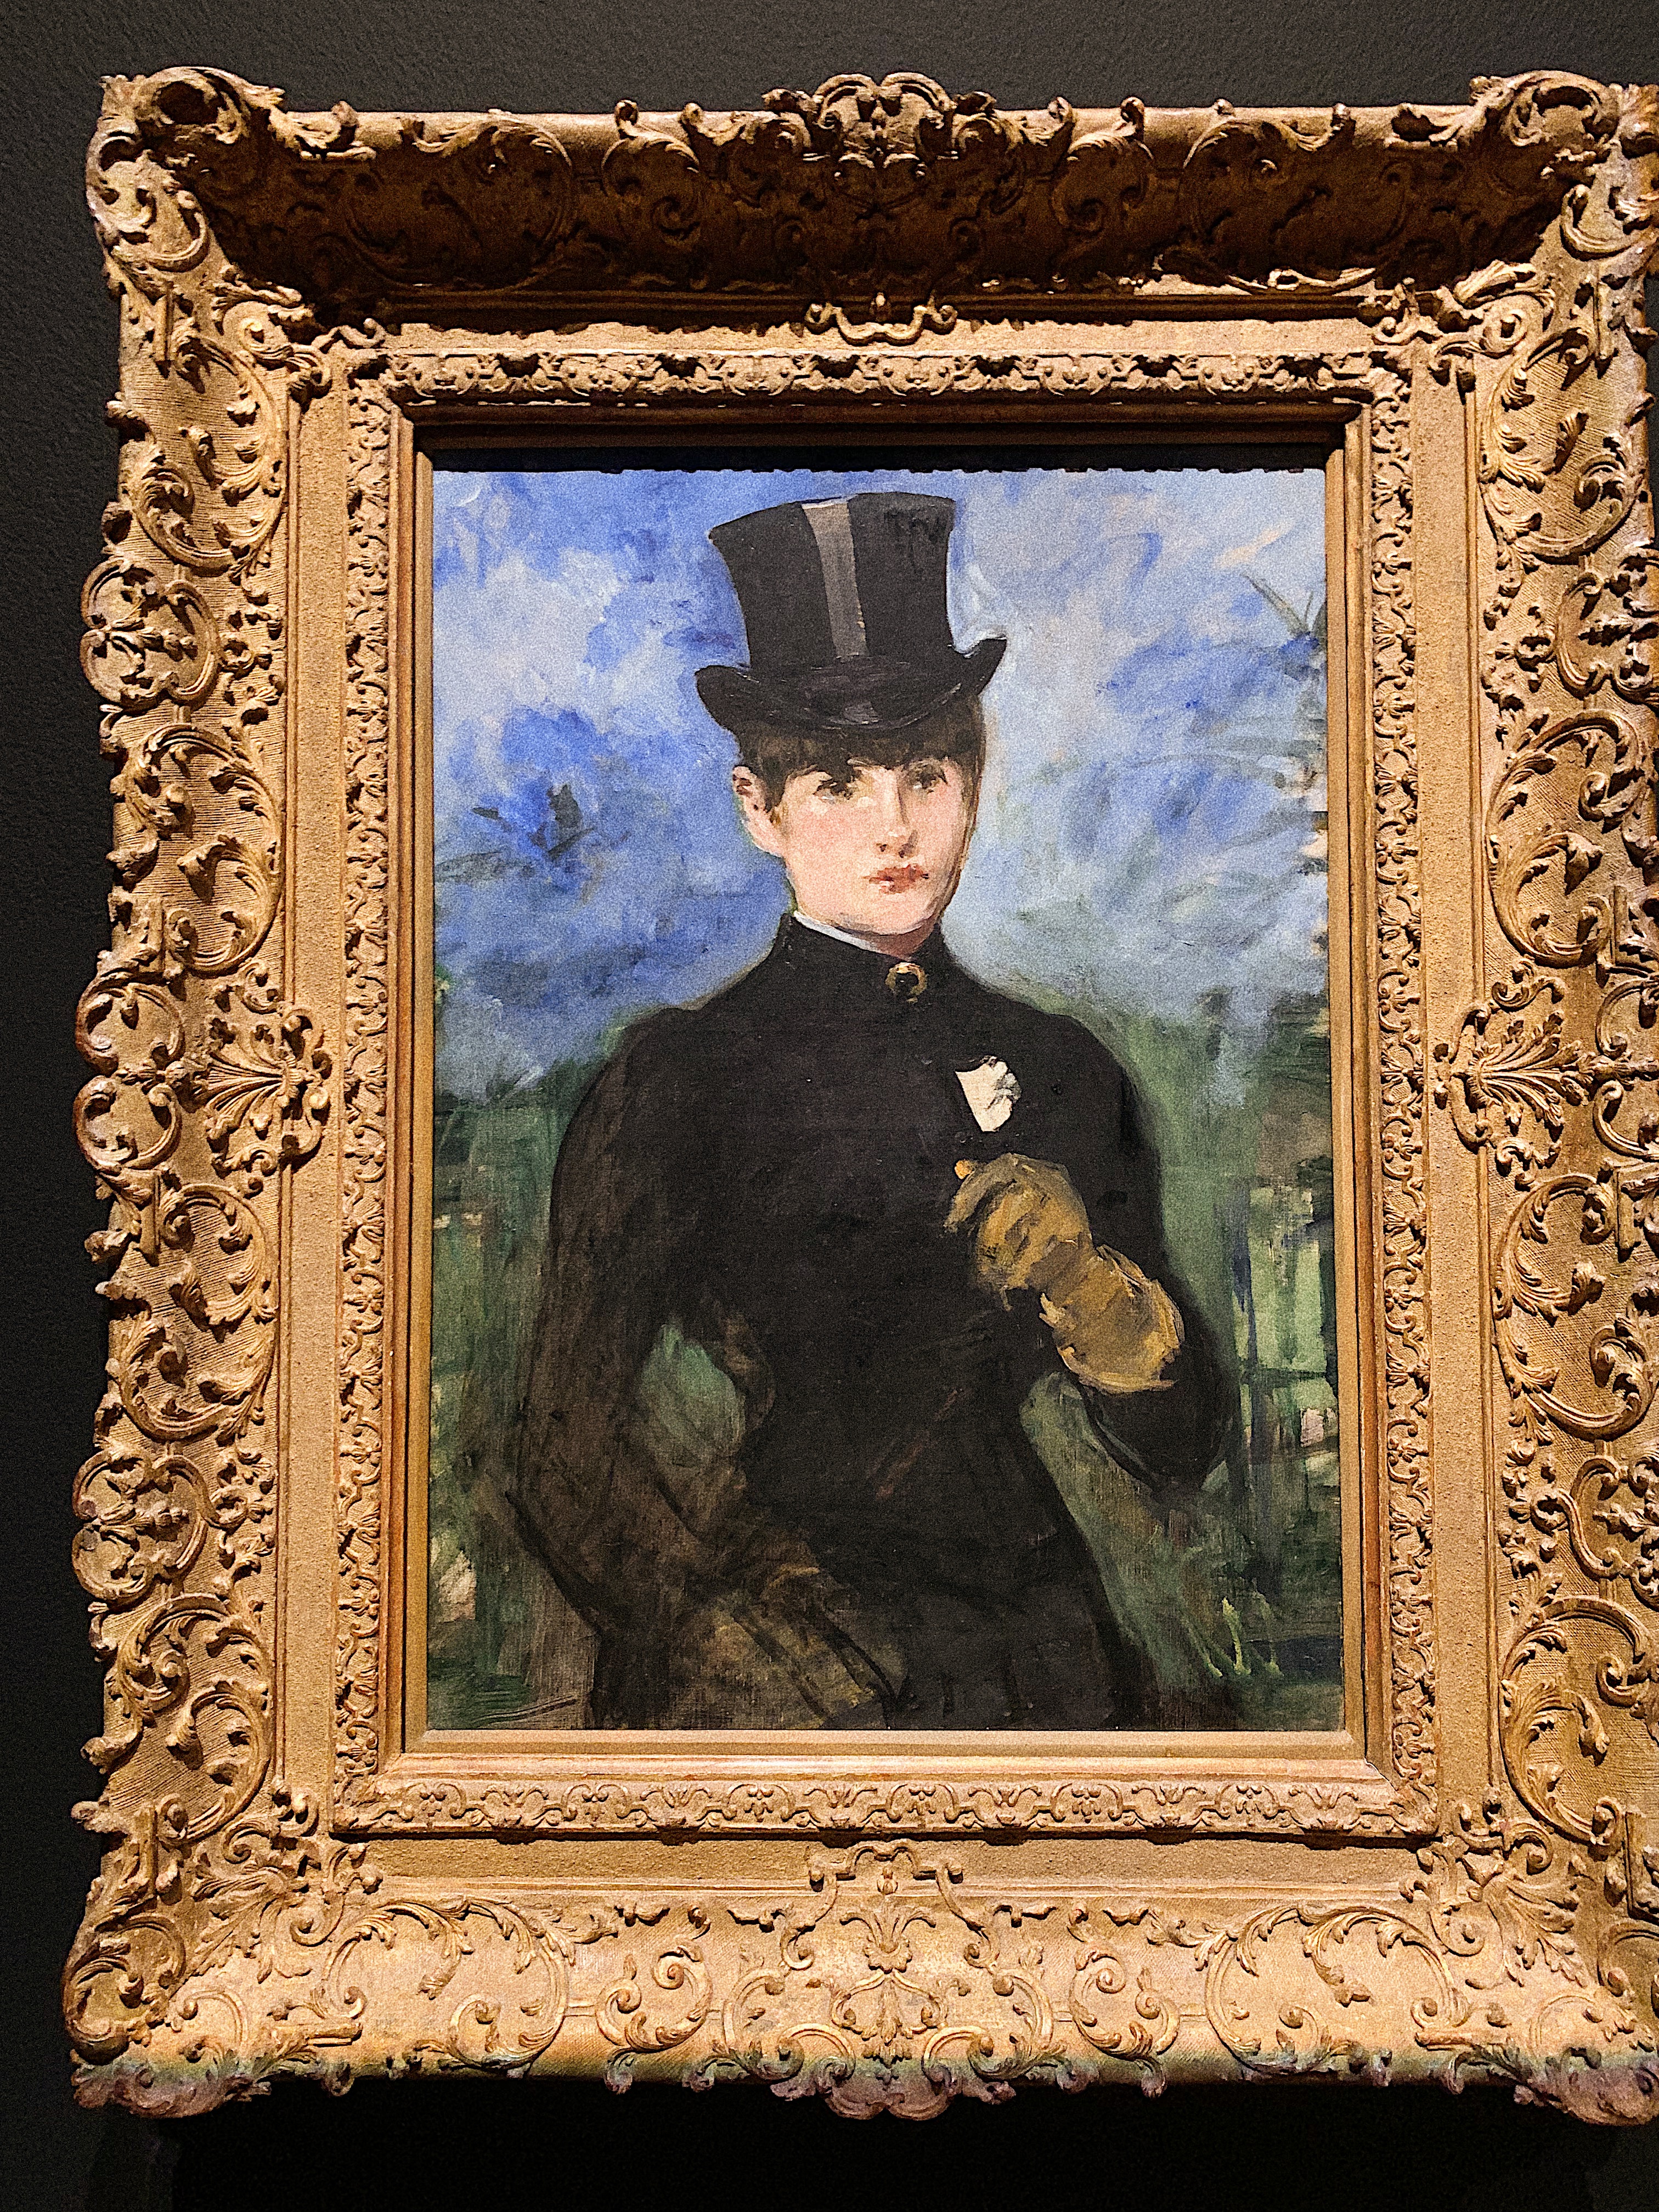 Edouard Manet, Getty Museum, Manet, Manet and Modern Beauty, Art, Manet's Young Woman in a Riding Costume, french modernist painting